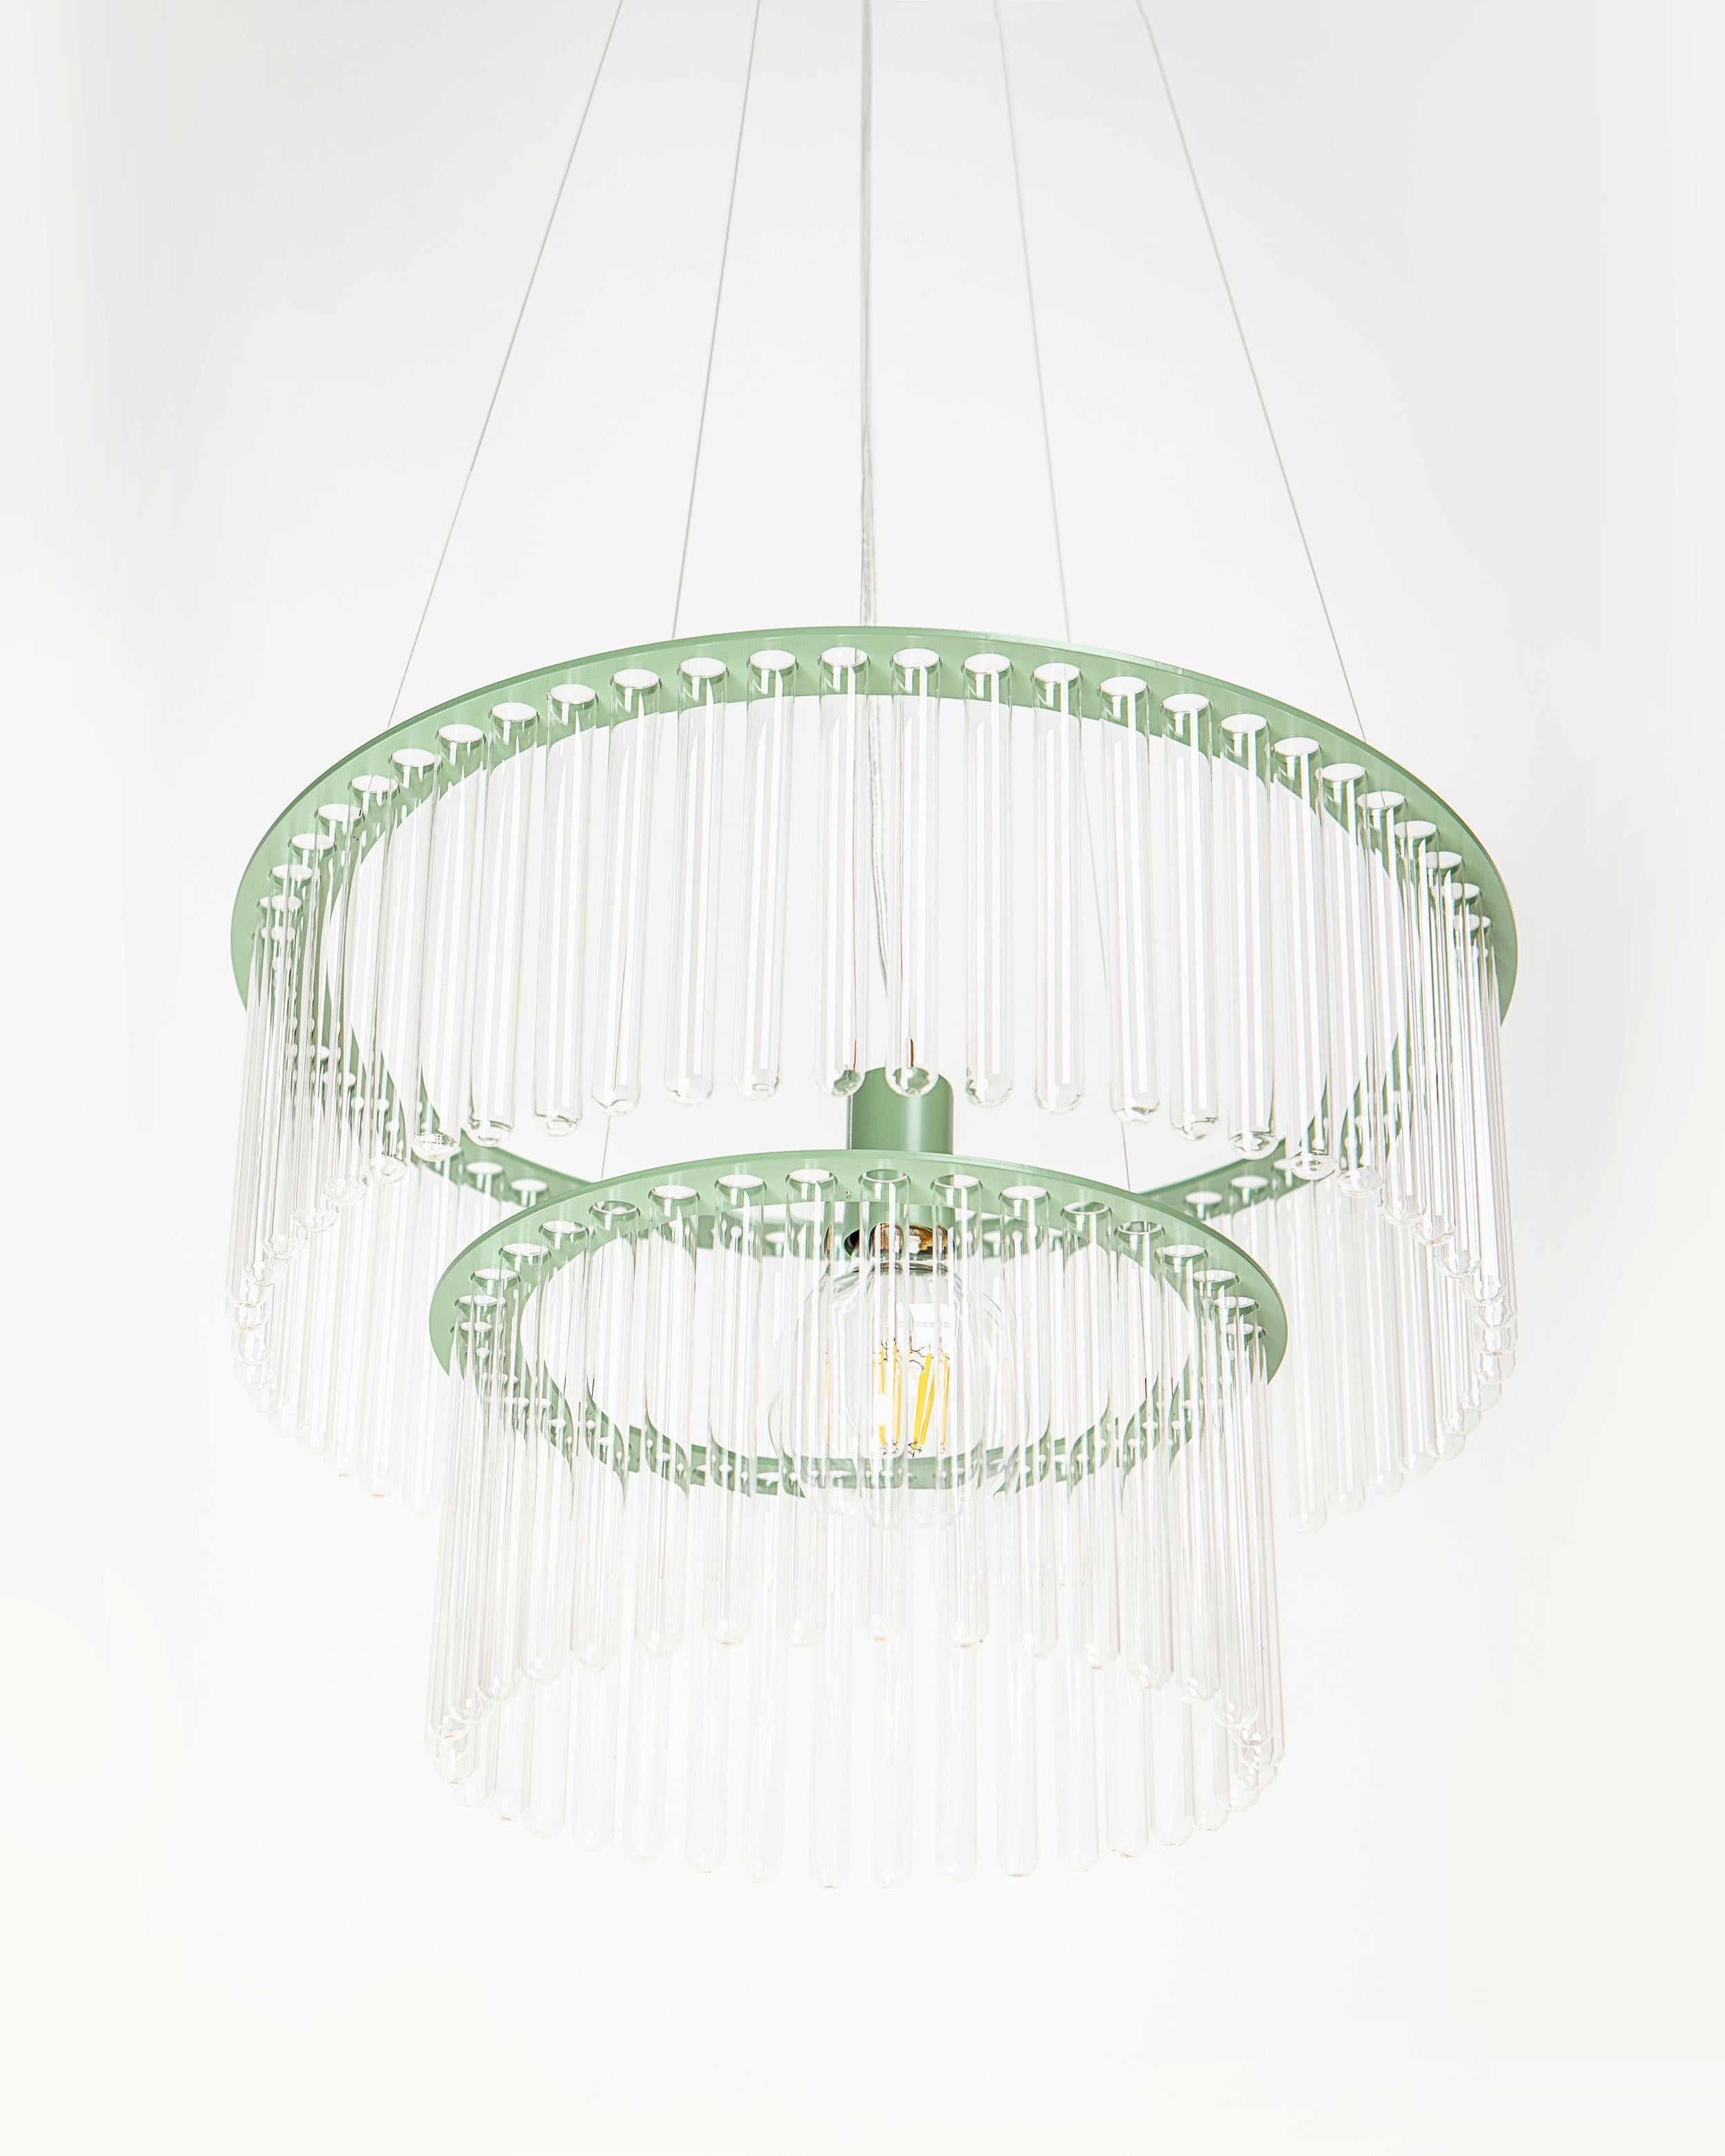 Maria S.C. chandelier is made from laboratory test tubes, set in two metal bands. Surprising material and geometric shape makes this lamp both classic and modern. It recalls Art Deco forms in a unique contemporary way. The use of ready-made objects